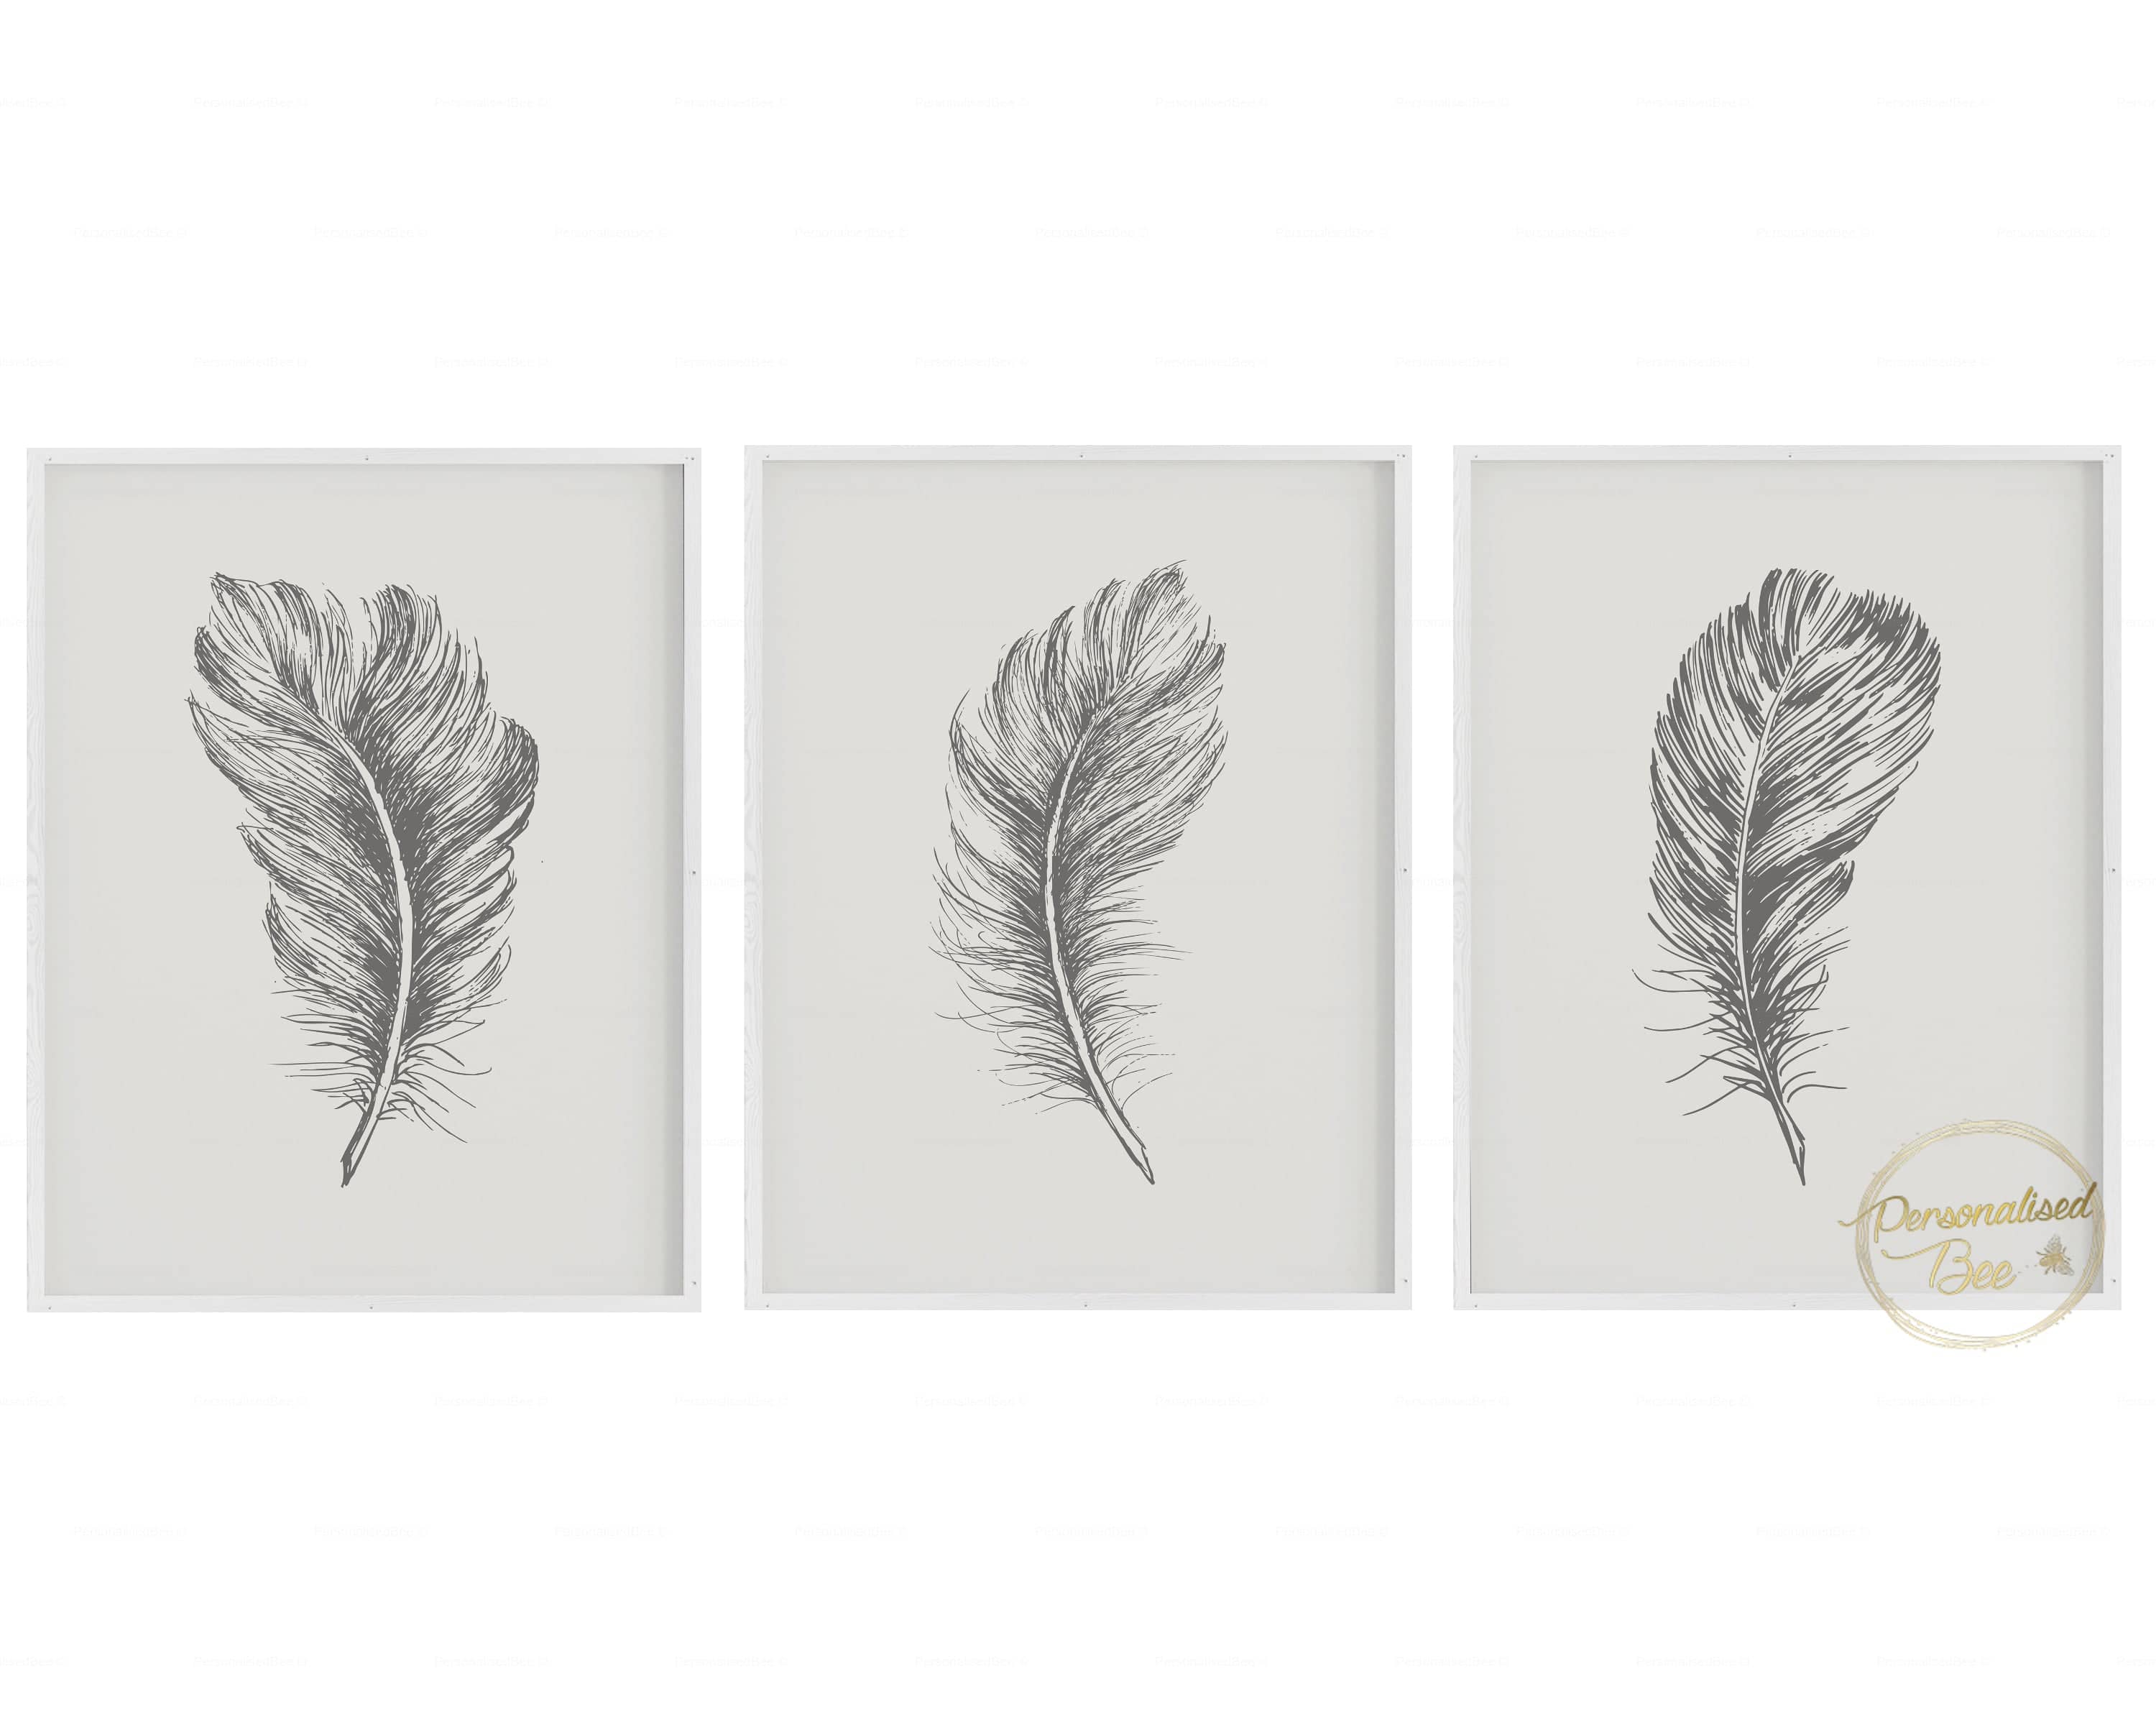 Grey Feathers Print - Set of 3.